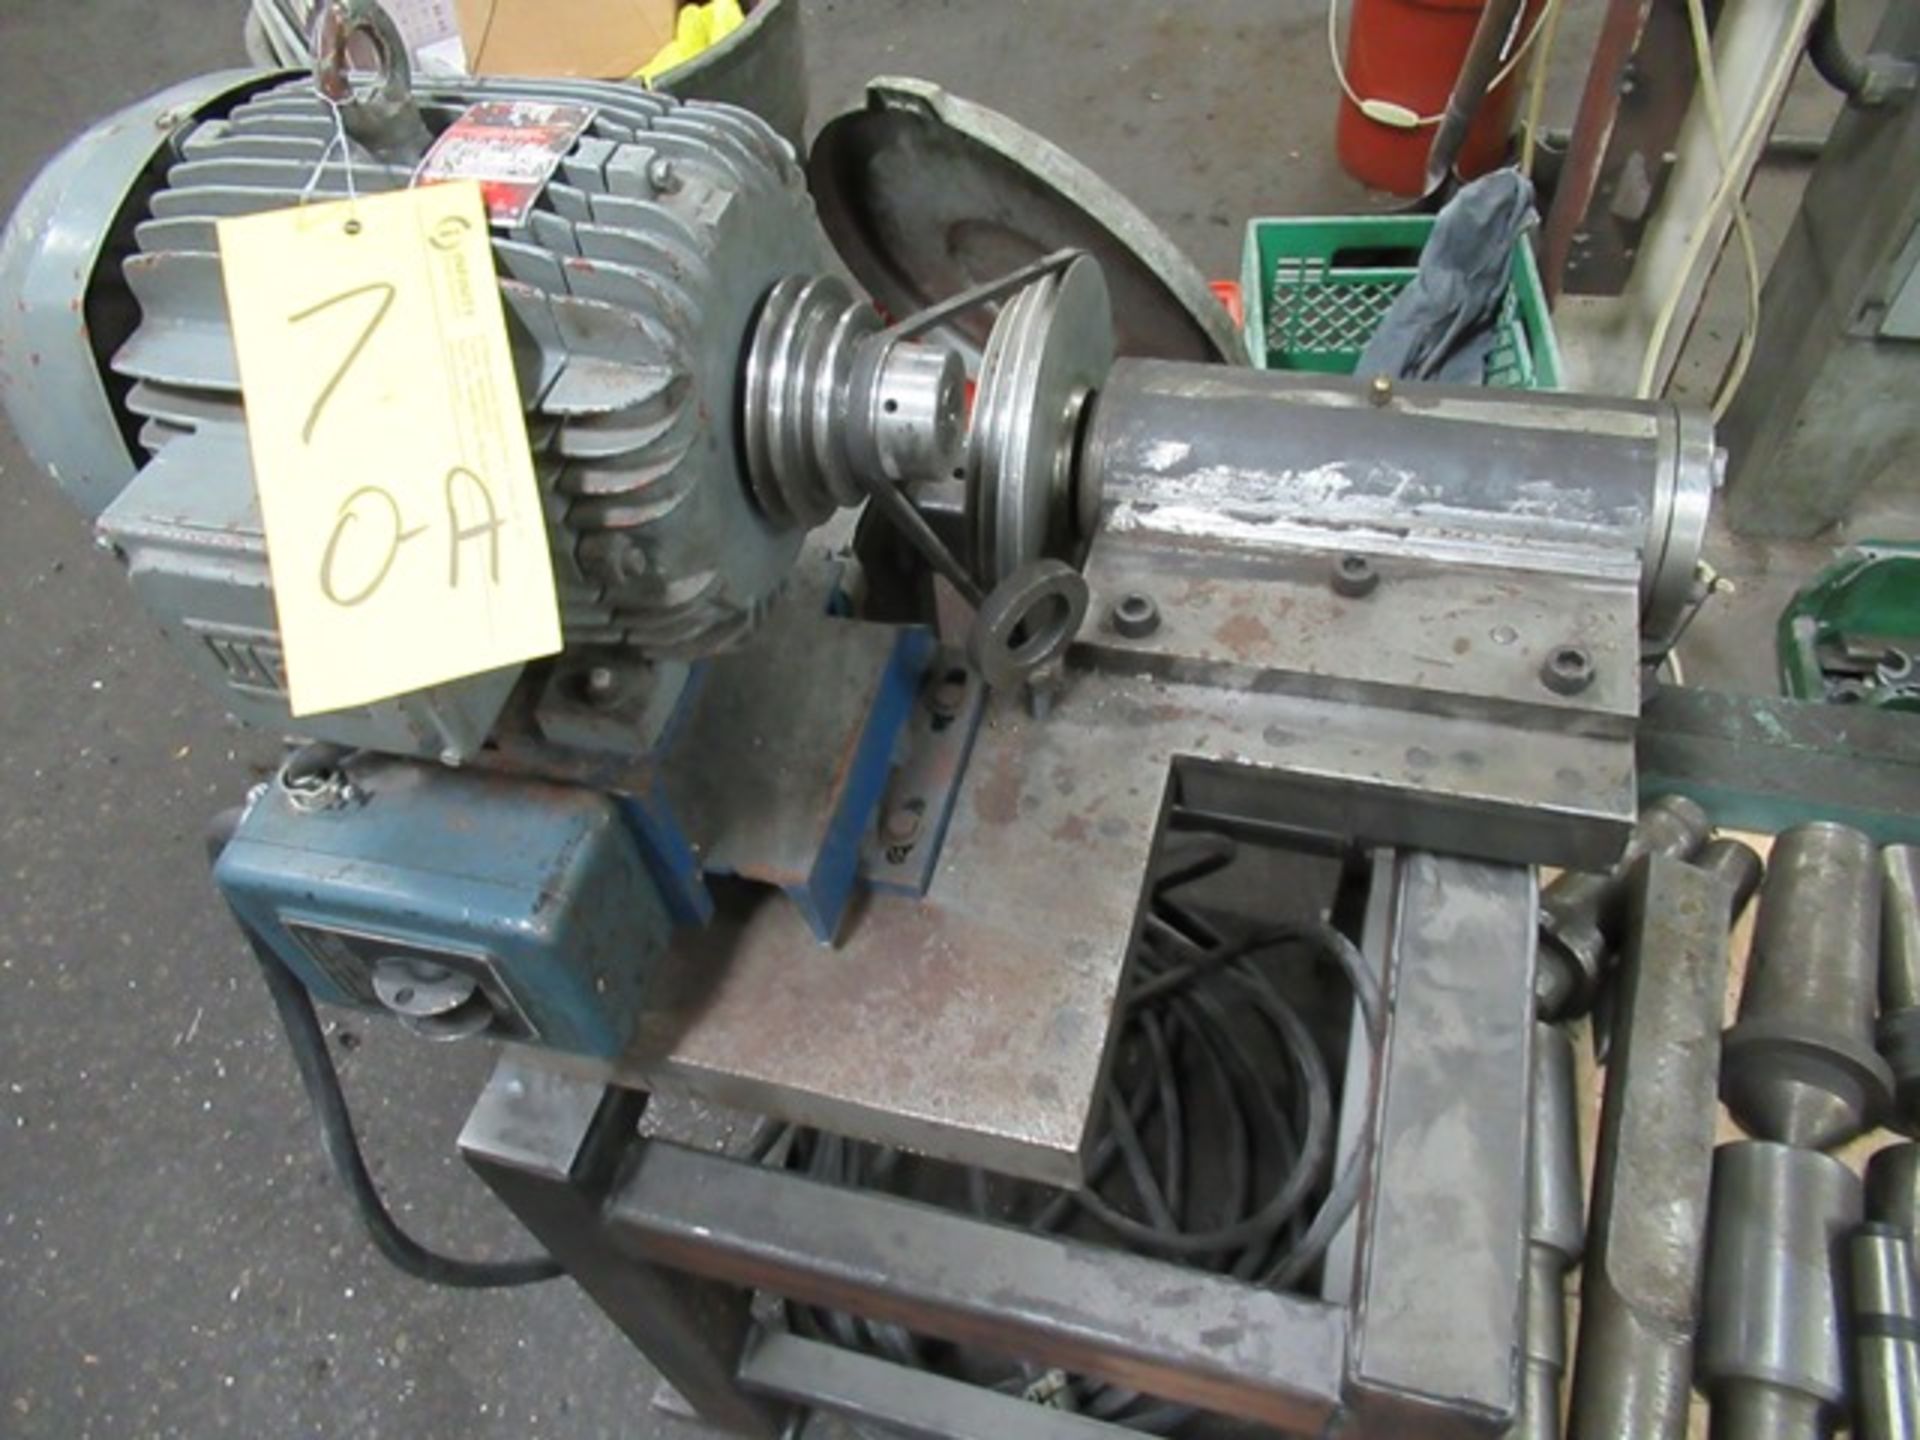 LOT ASST. LATHE TOOLING, 2HP KEYWAY ATTACHMENT, ETC. - Image 2 of 2